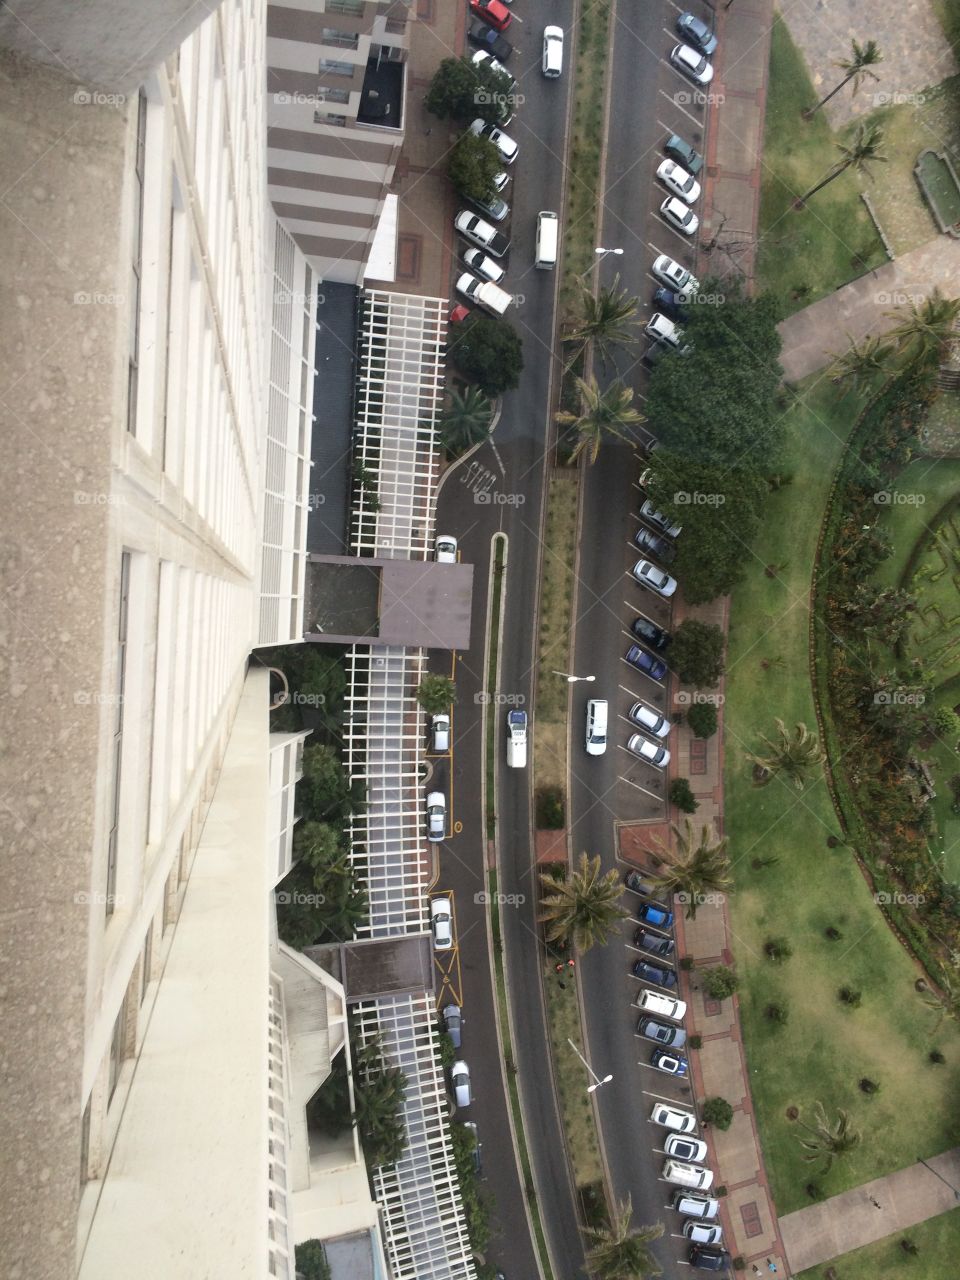 View from the top. Standing in a hotel overhang